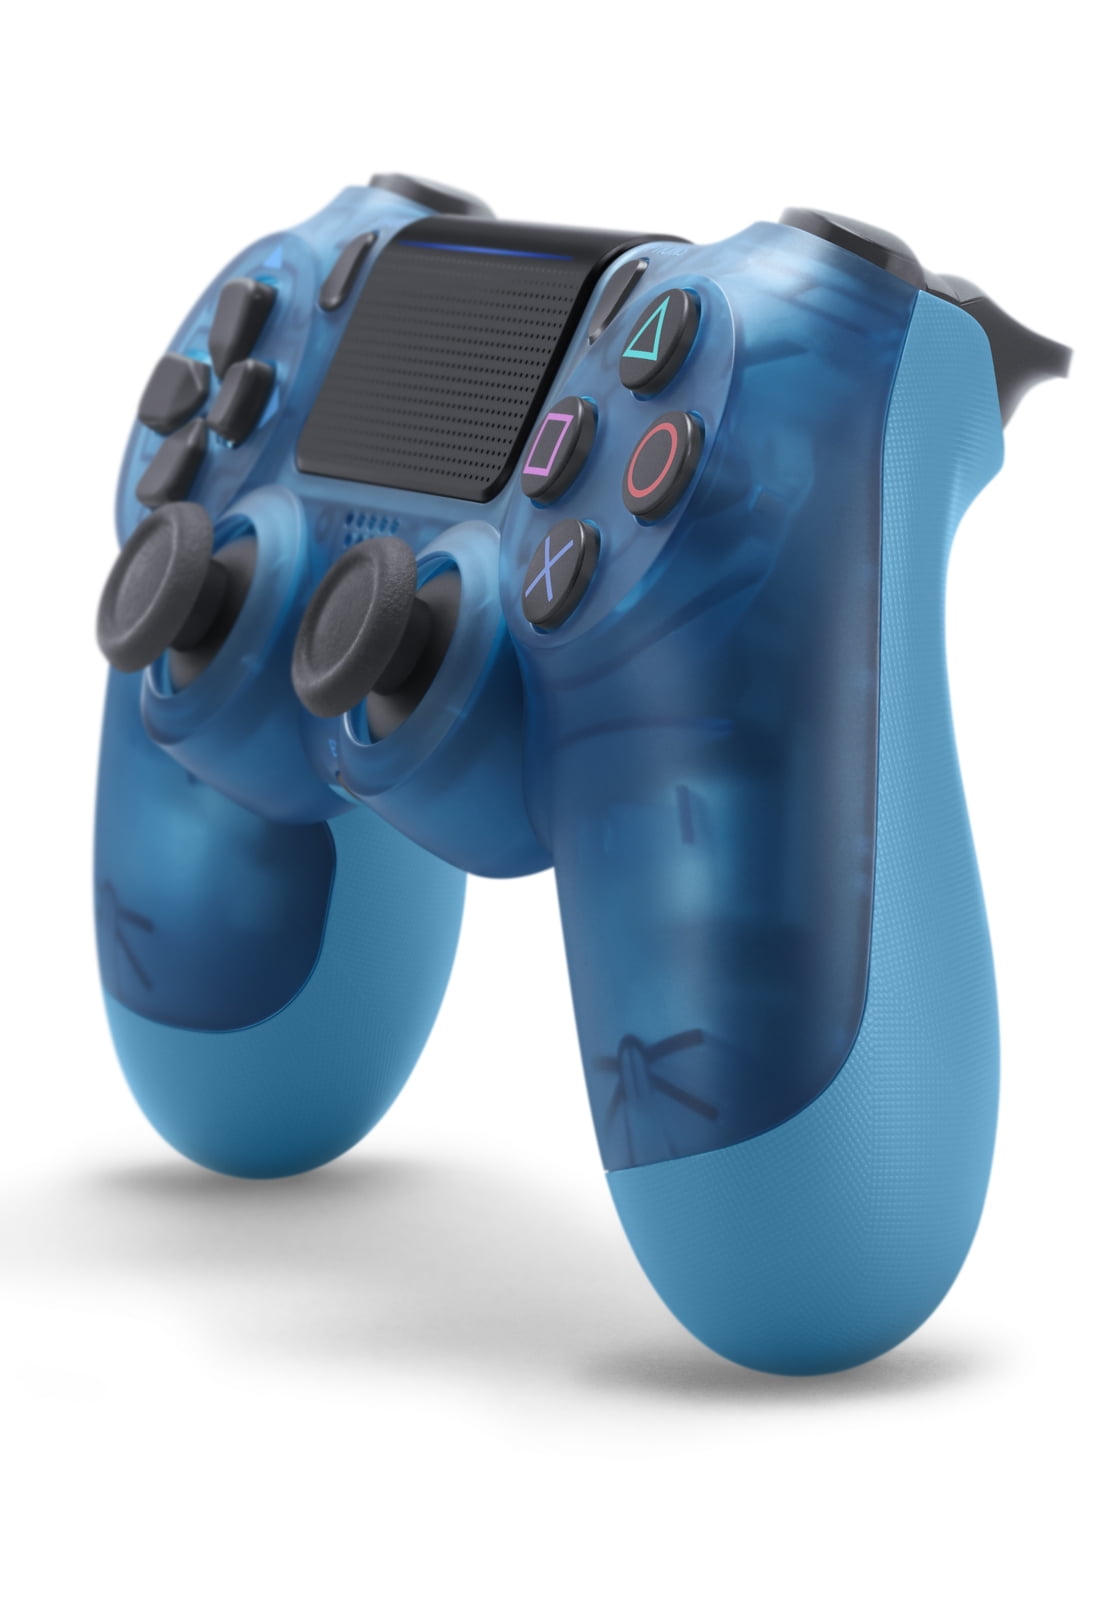 black ice ps4 controller